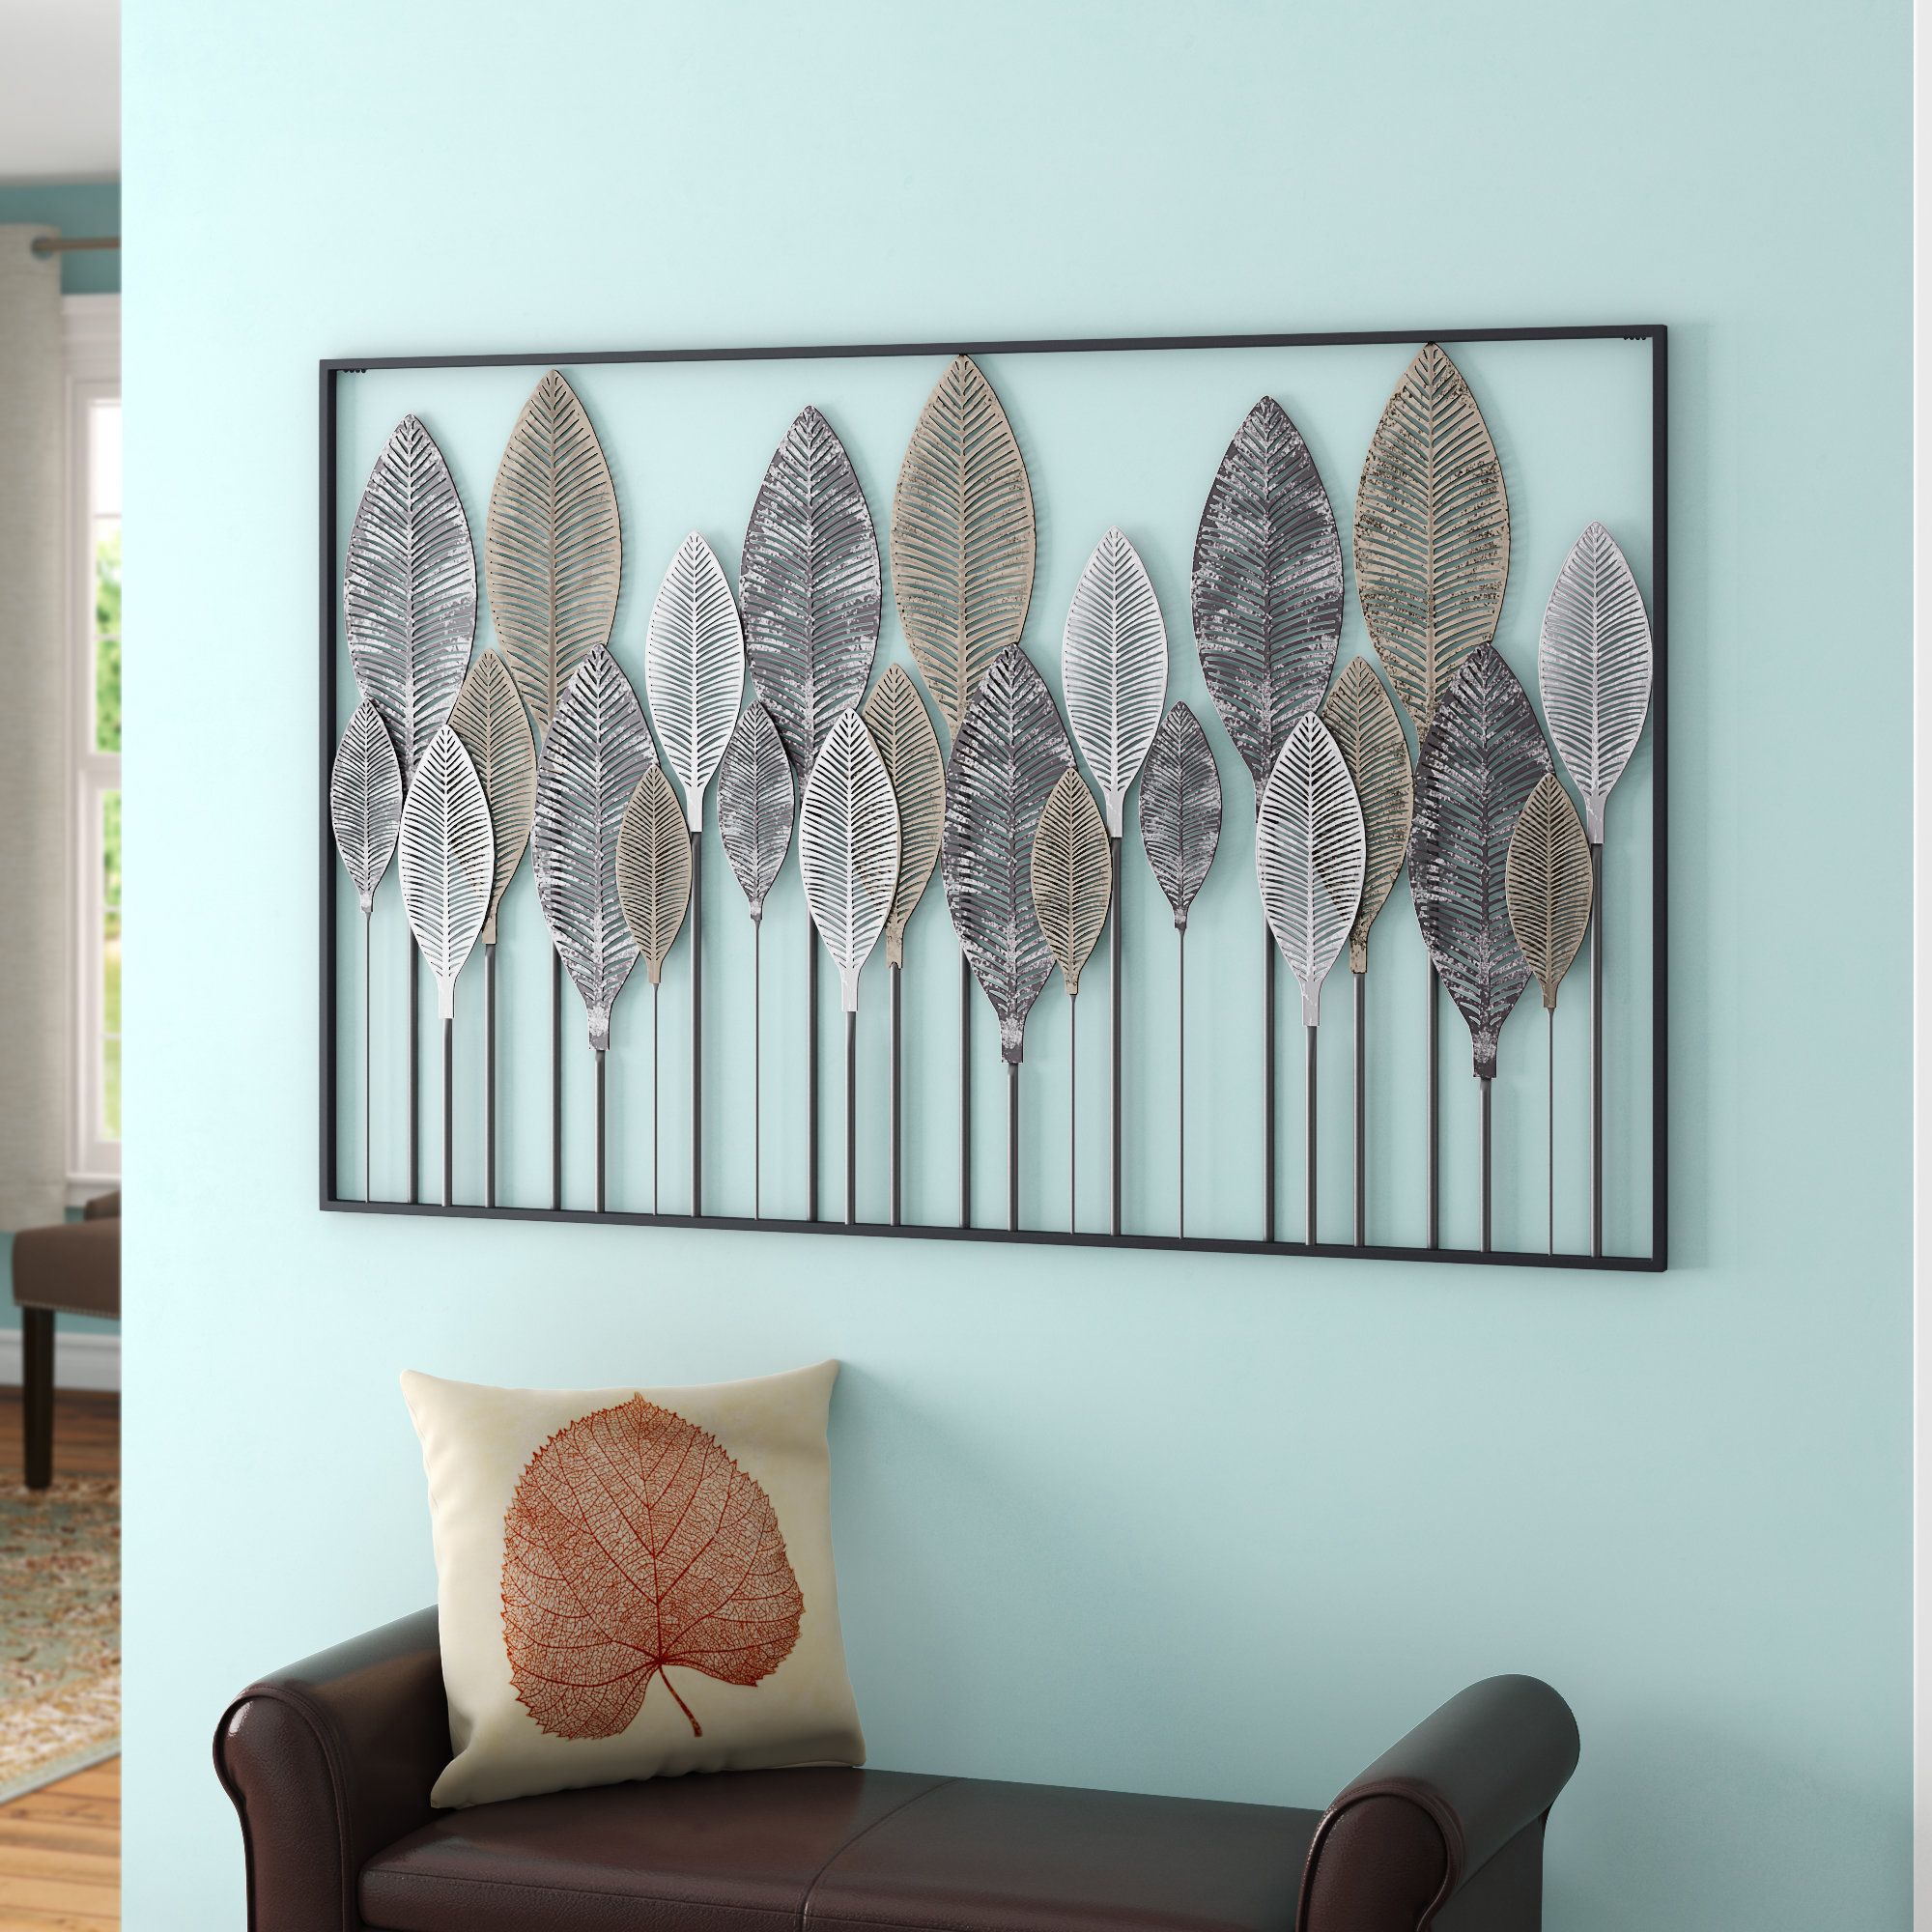 20 Best Ideas Tree of Life Wall Decor by Red Barrel Studio